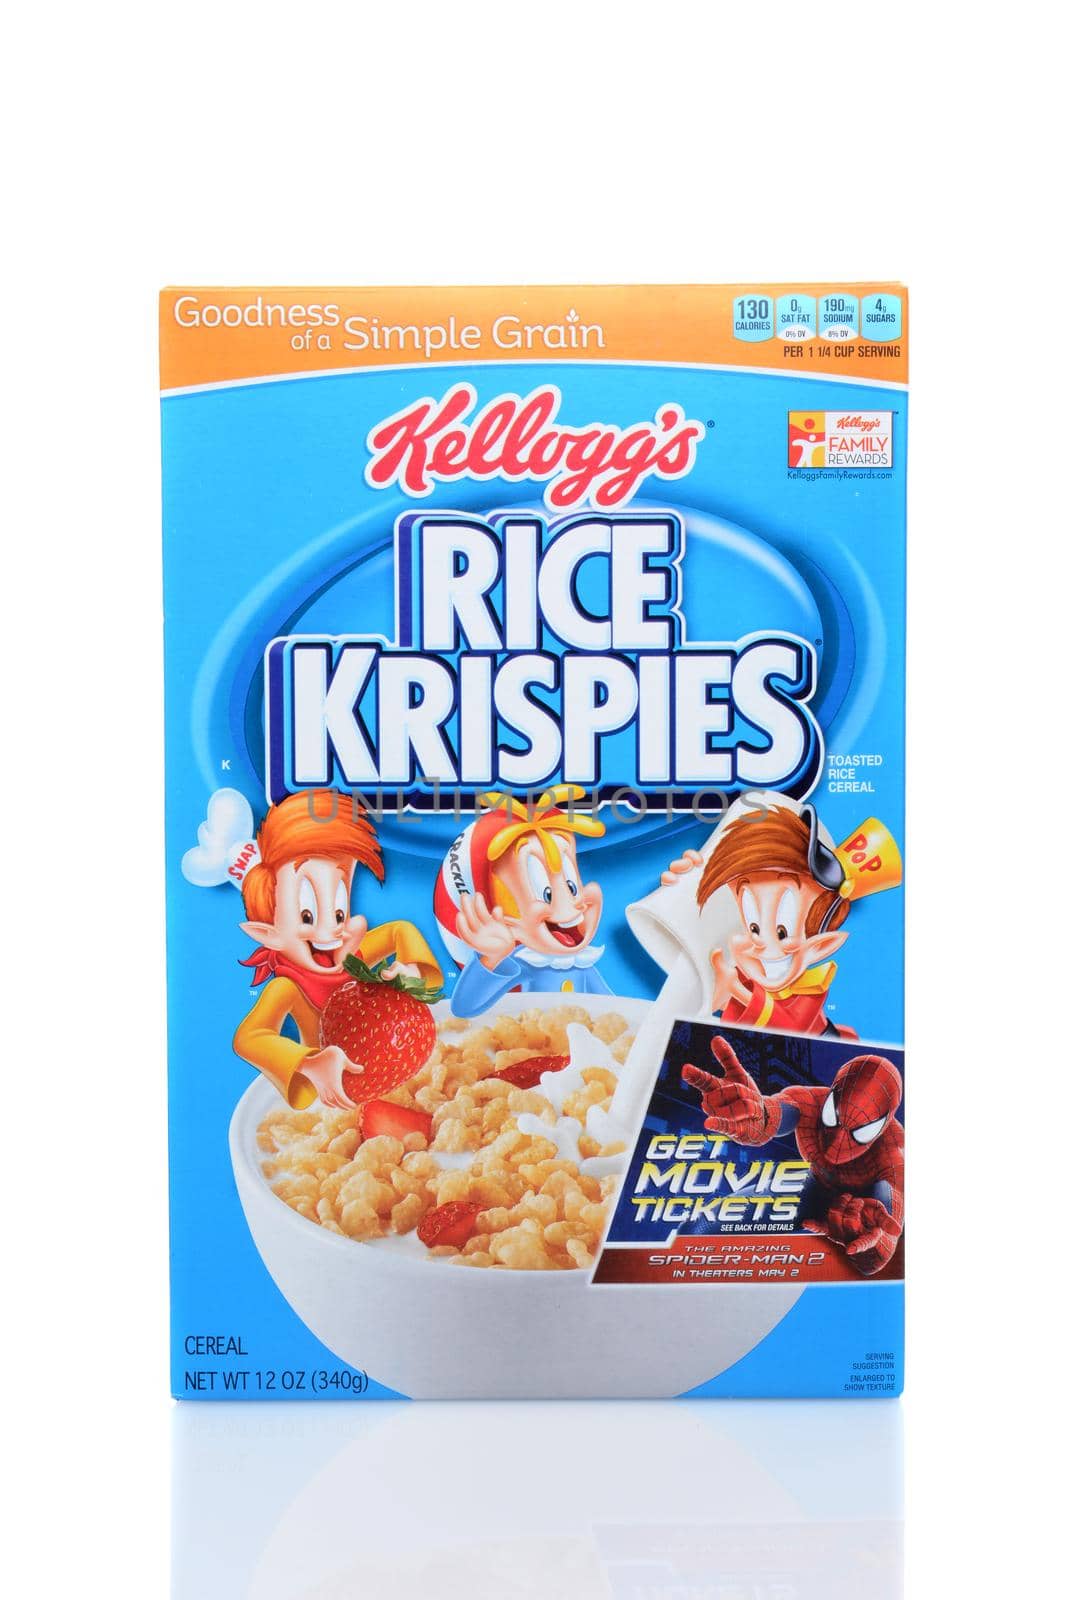 IRVINE, CA - JUNE 23, 2014: A box of Kellogg's Rice Krispies Cereal. Headquartered in Battle Creek, Michigan, Kellogg's produces cereals, cookies, crackers, toaster pastries and cereal bars.